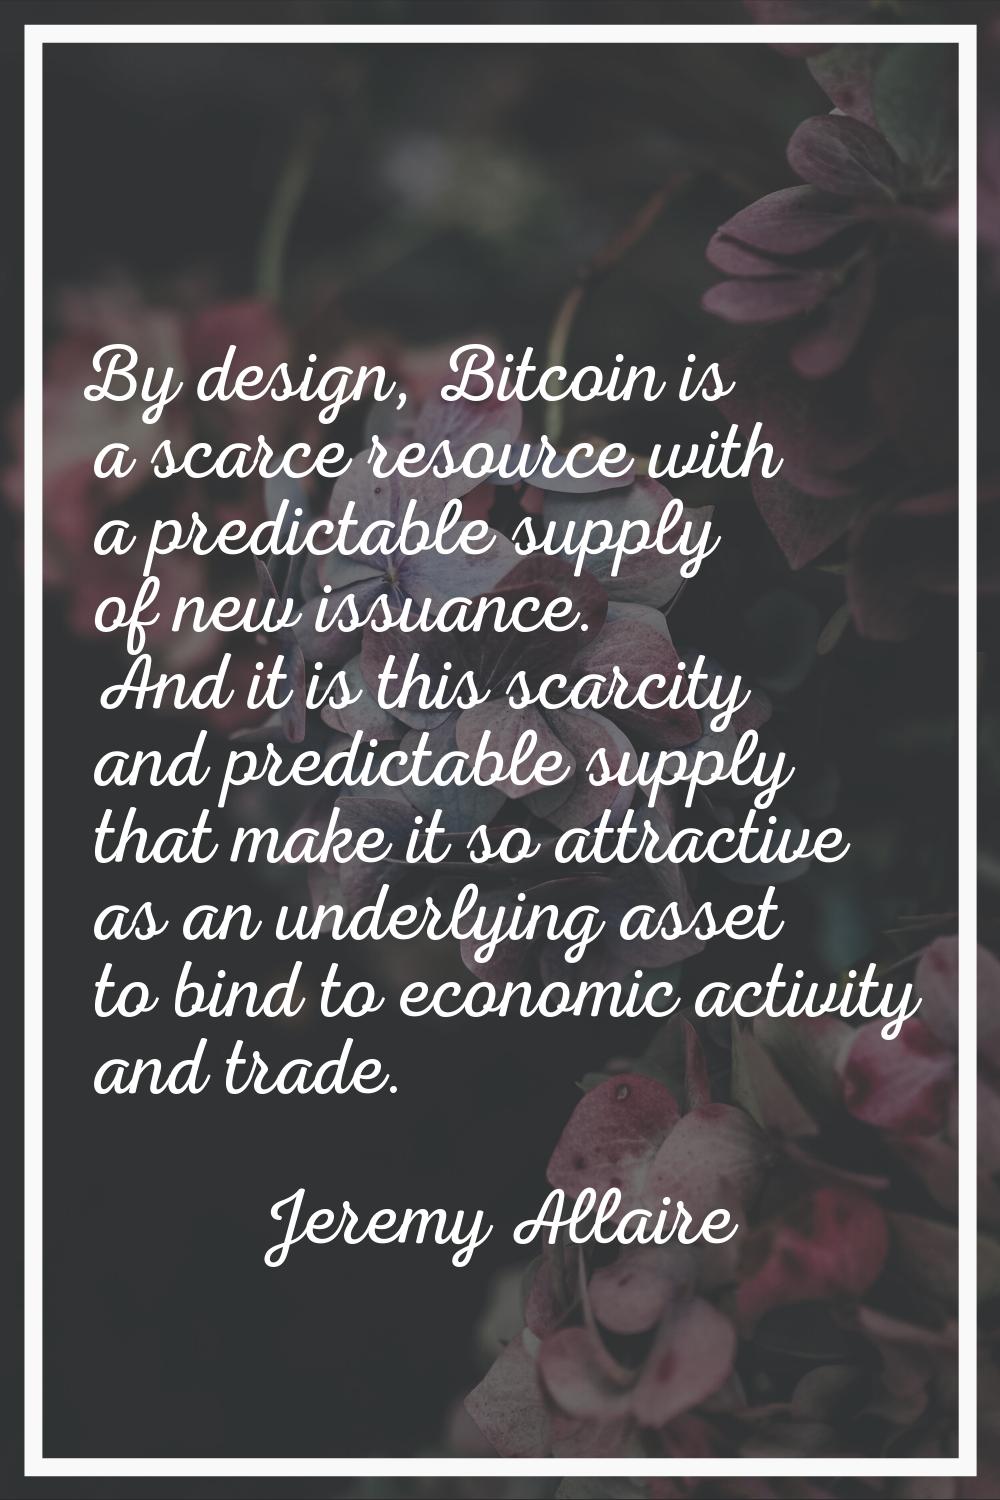 By design, Bitcoin is a scarce resource with a predictable supply of new issuance. And it is this s